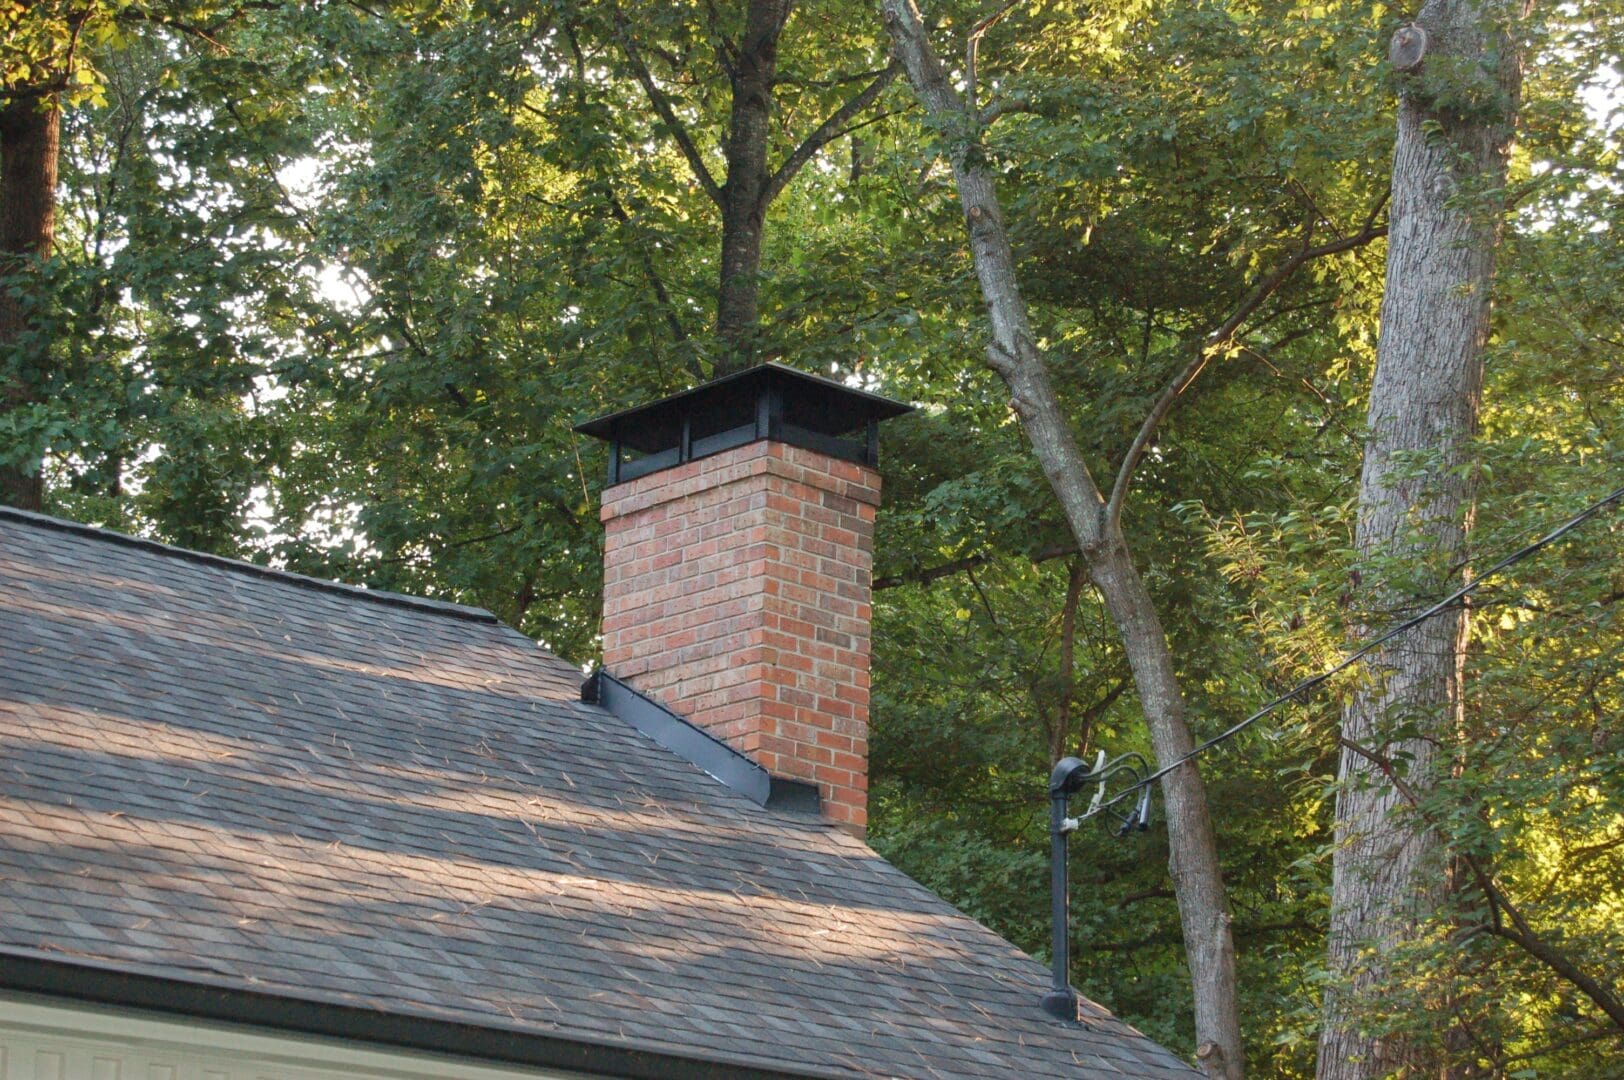 A brick chimney on the side of a house.